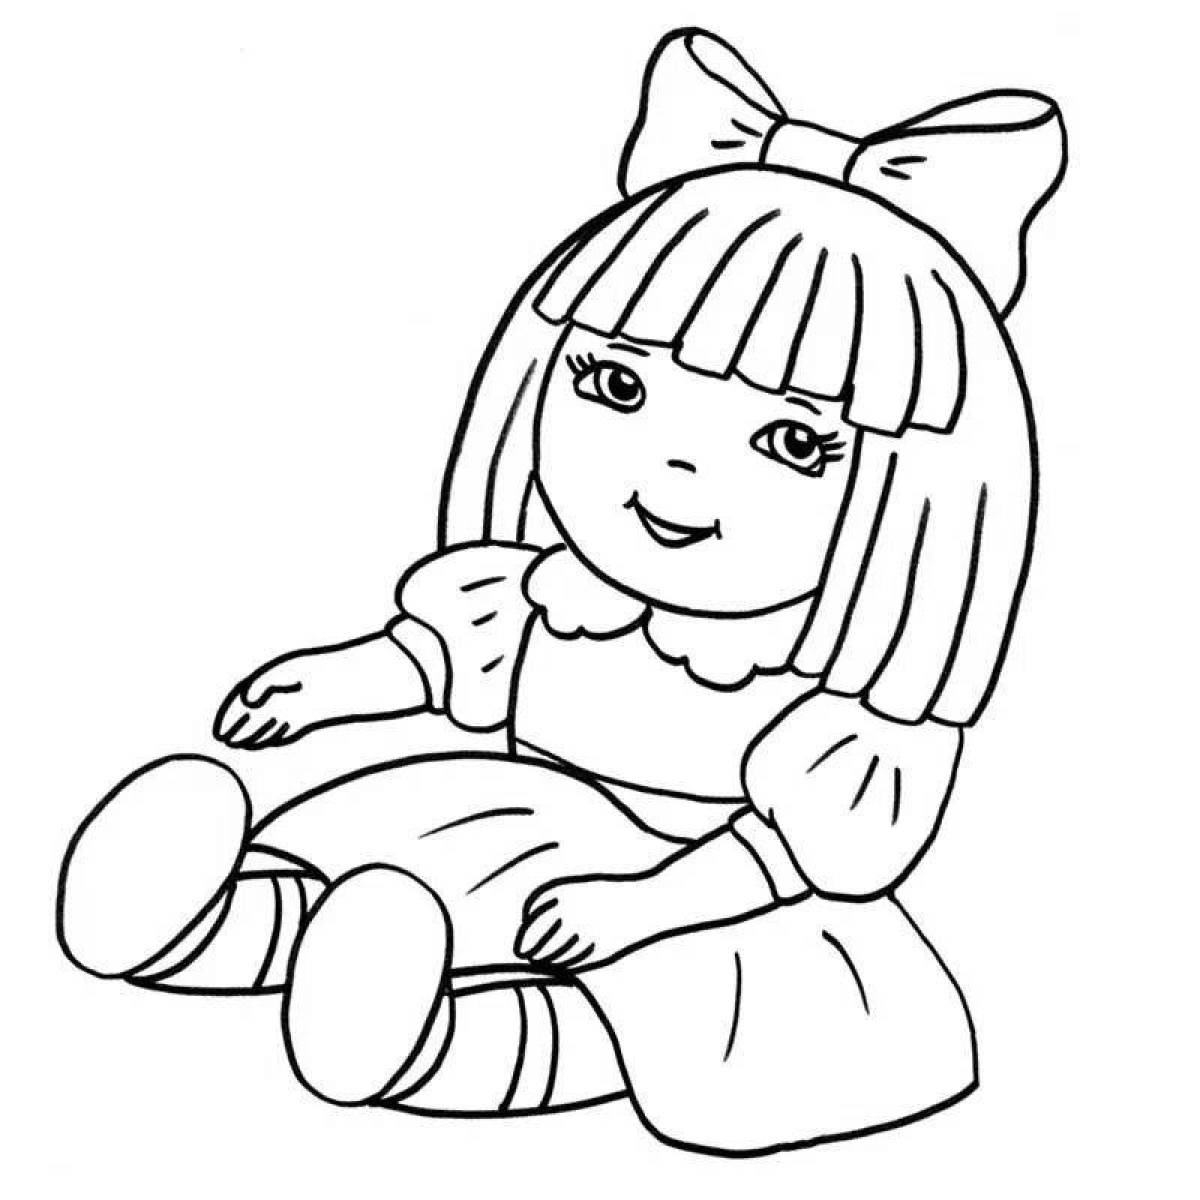 Adorable doll coloring book for 2-3 year olds